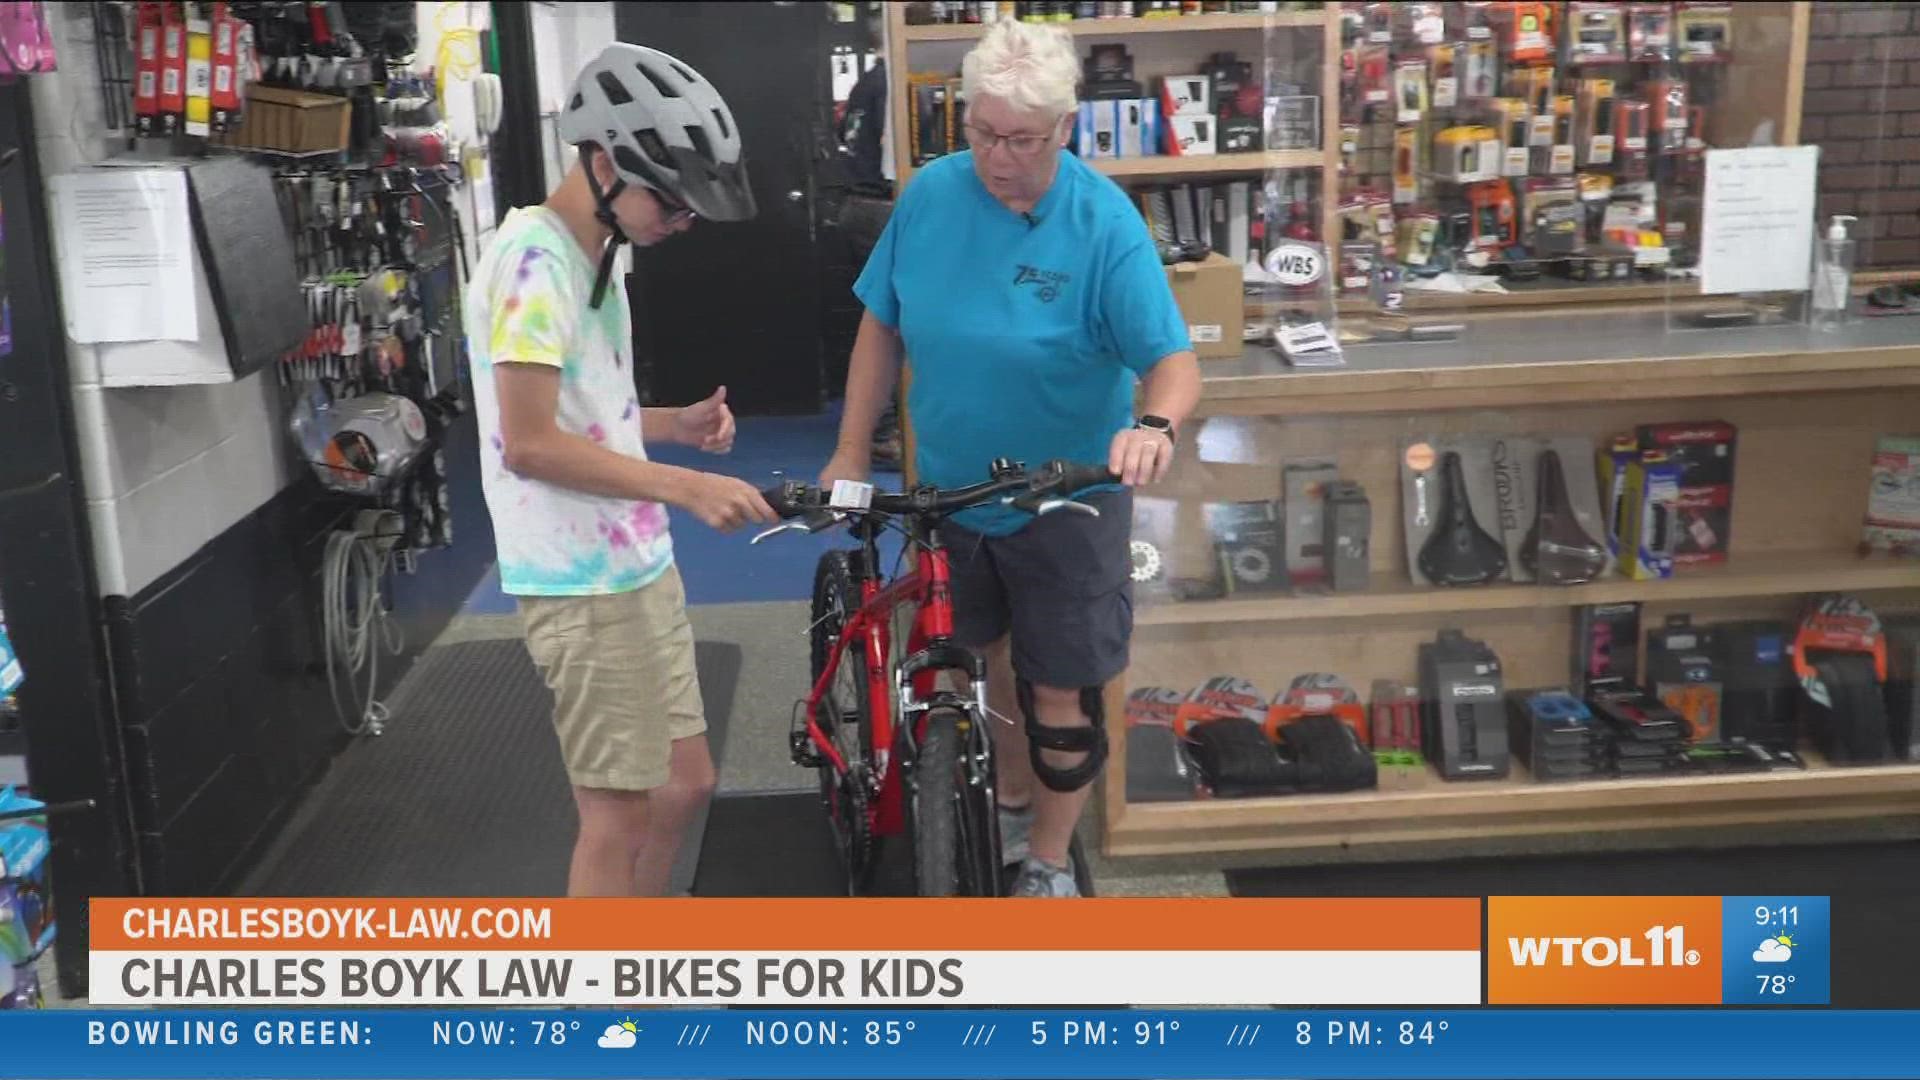 Brody is the fifth winner of a bike donated by Charles Boyk Law. Also, Boyk Law offers safety tips for vacation.